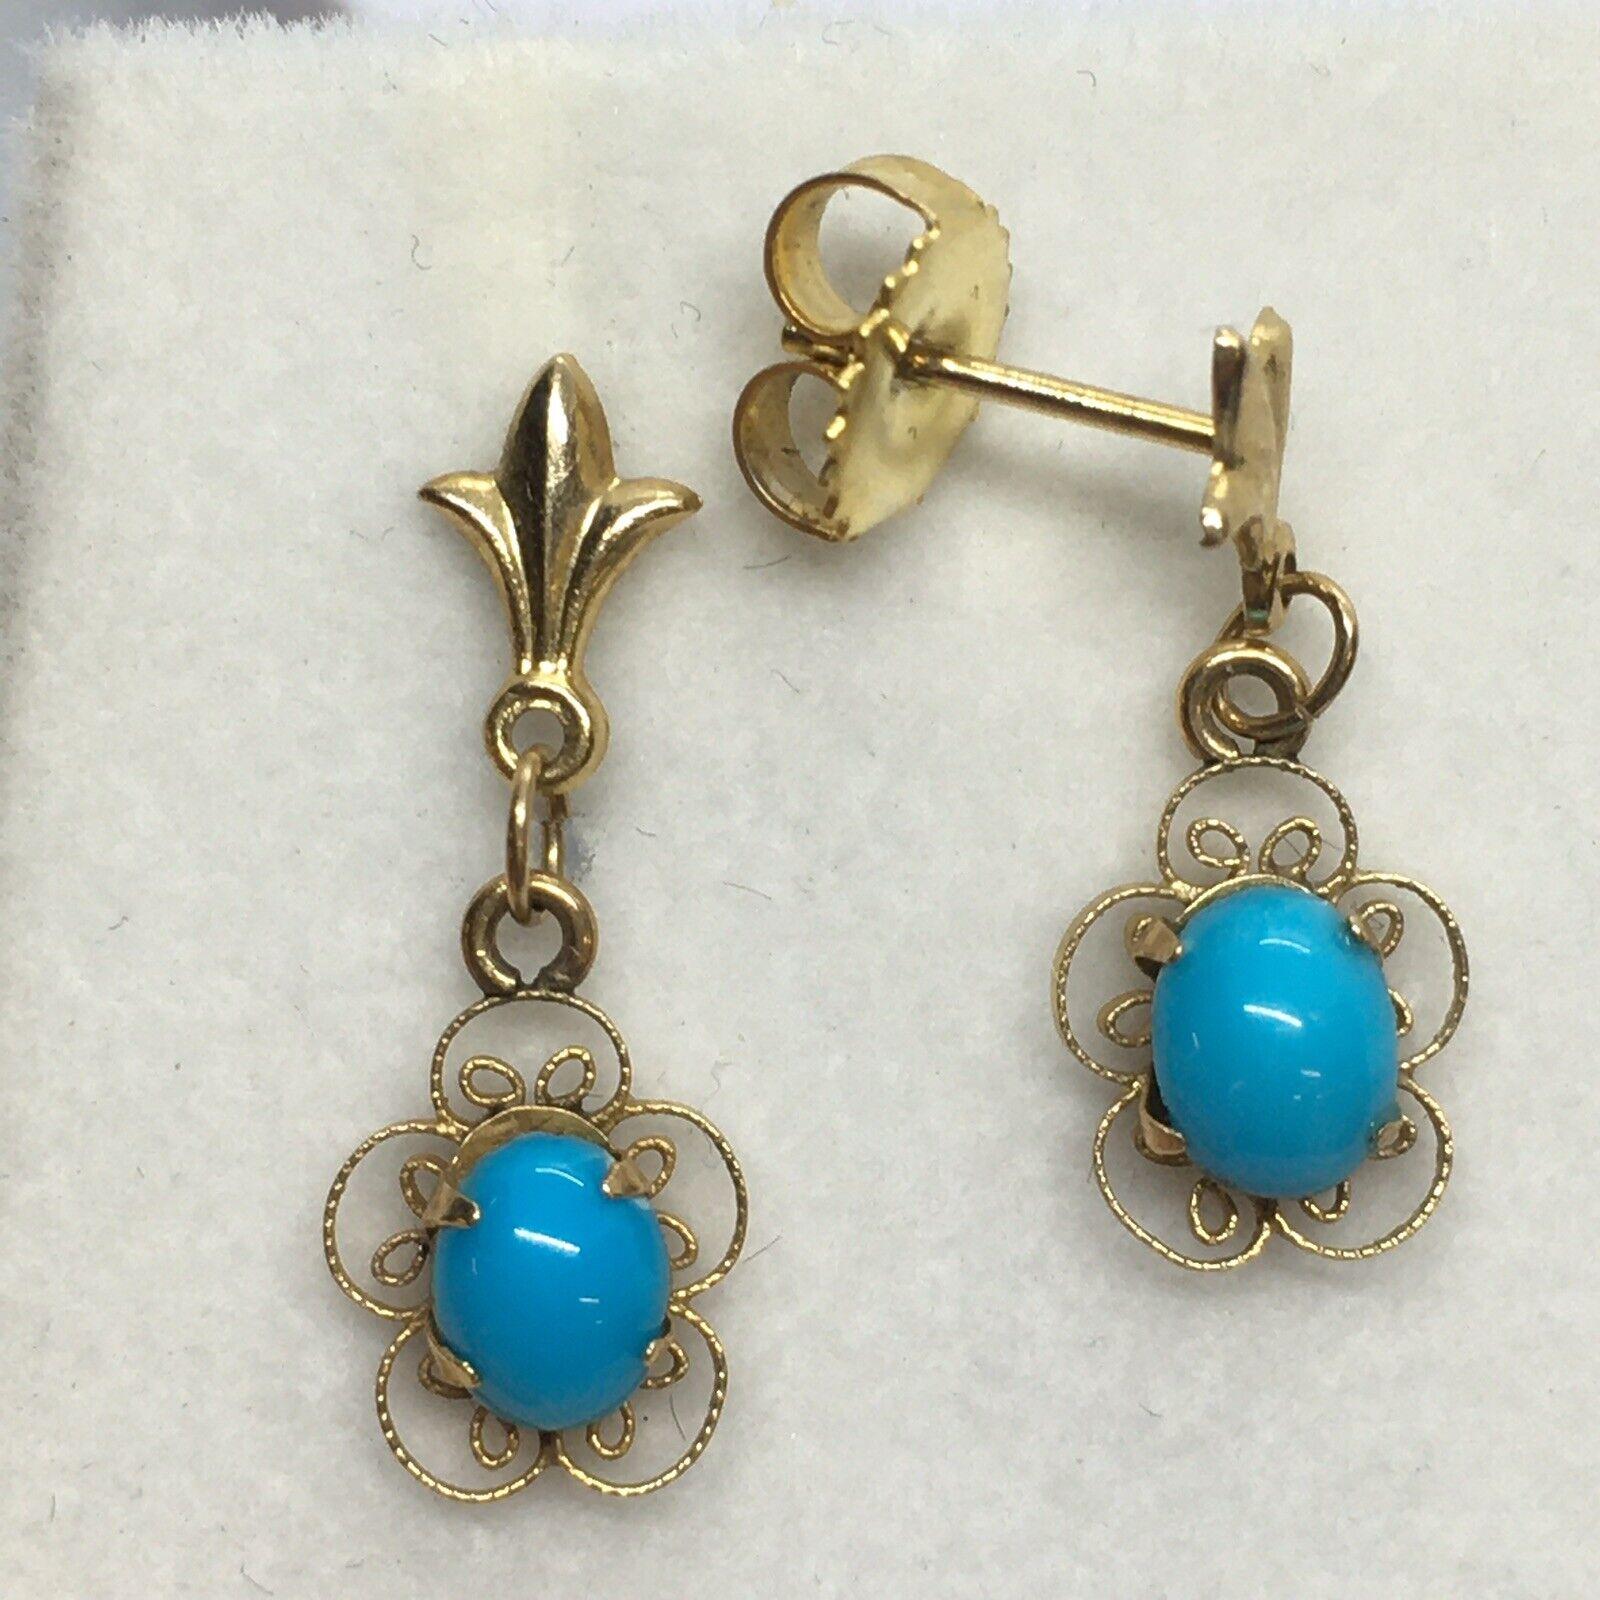 14k Filigree Gold Turquoise Retro 1940s  Drop Earrings Hand Made American


1.0 gram
3/4 inch hanging
6 mm by 5 mm natural Turquoise
No damage, no evidence of any repairs, see pictures 